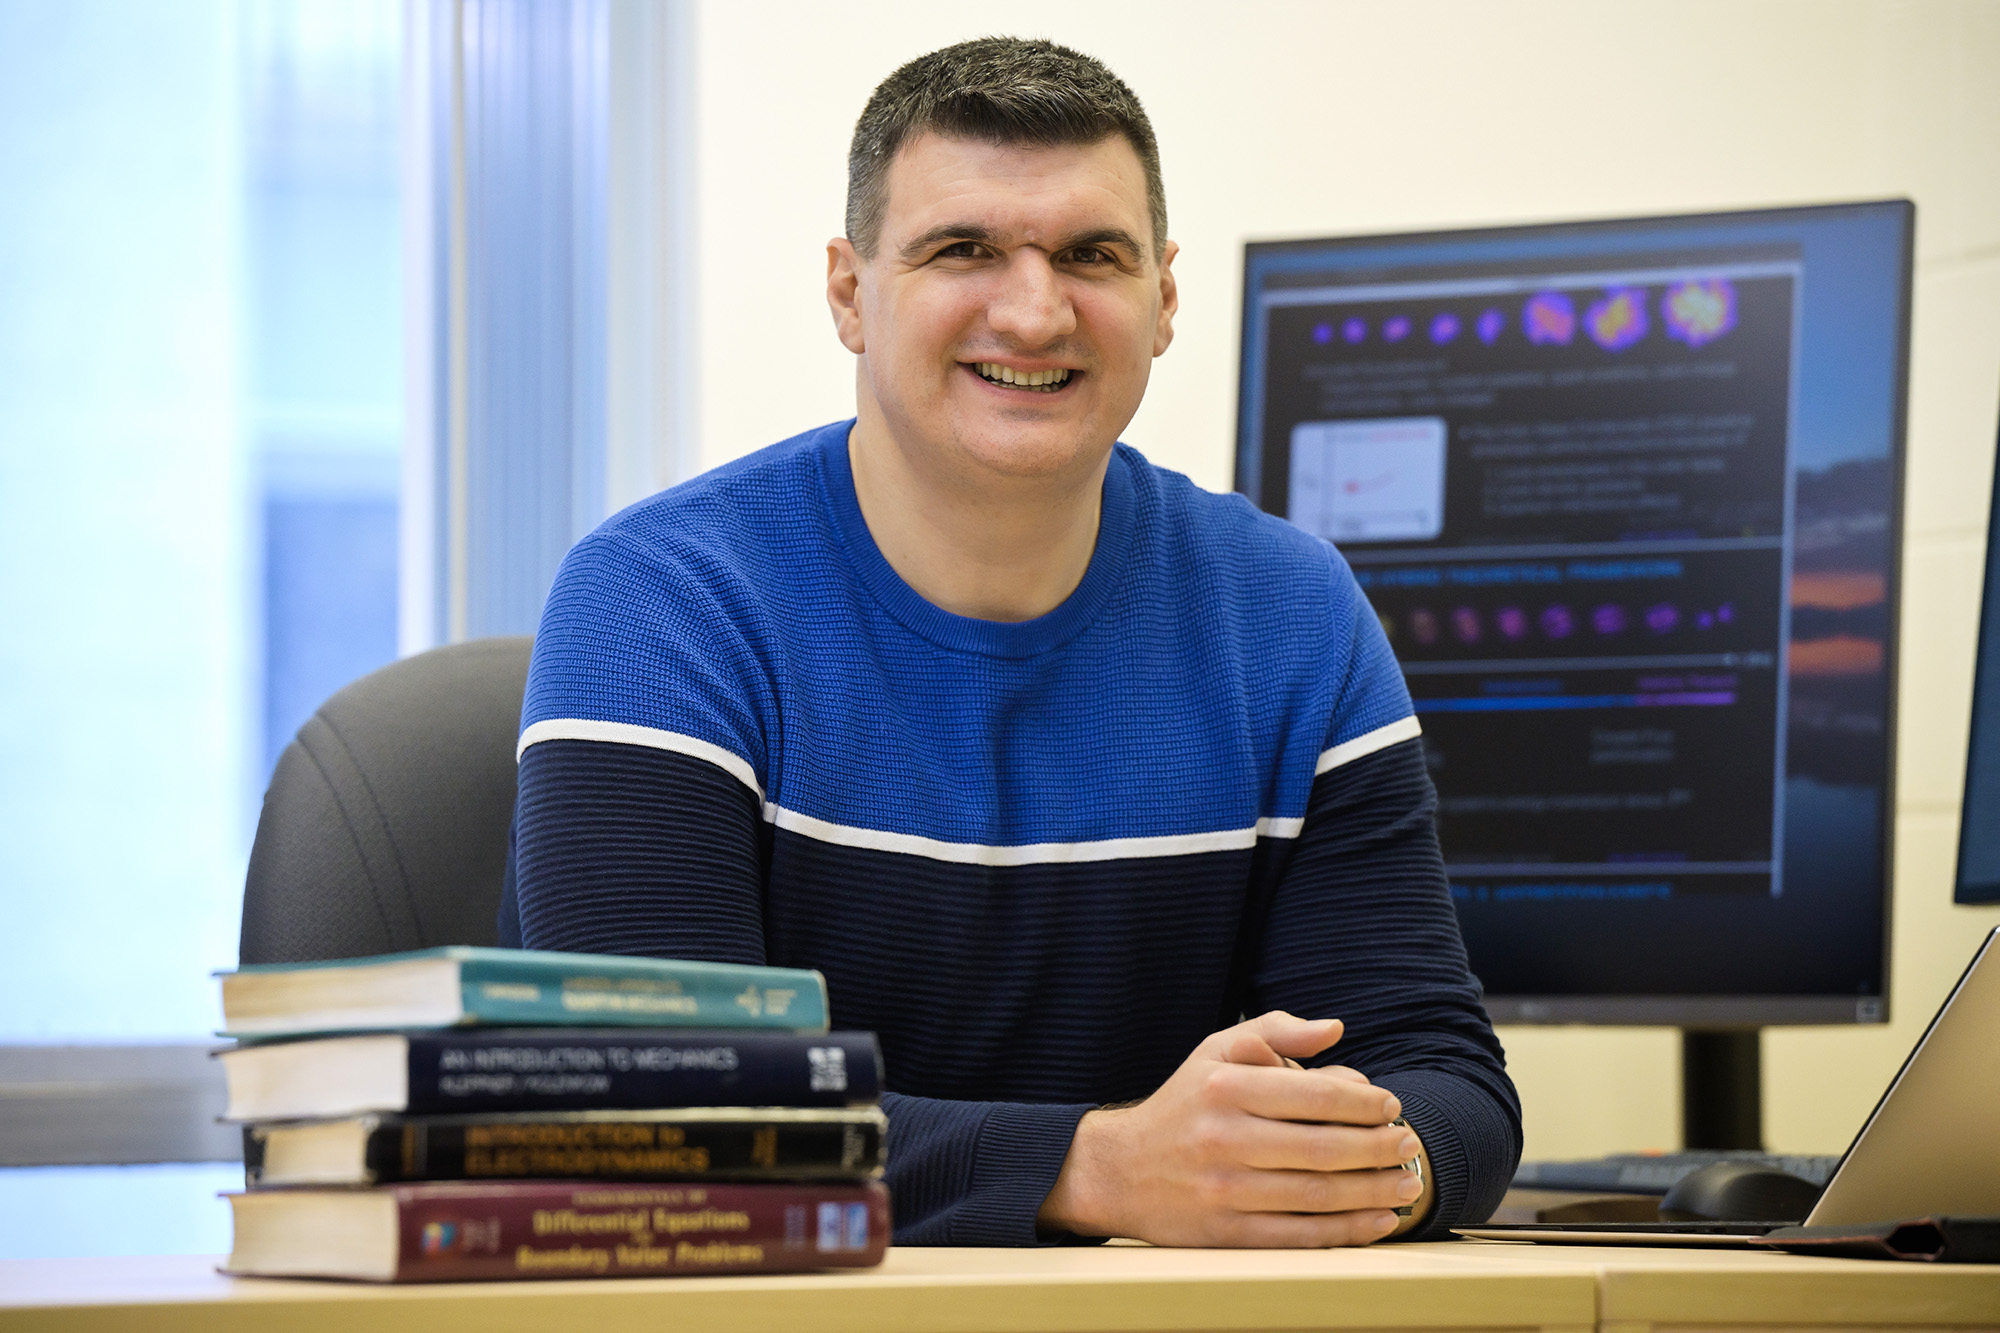 Dr. Gojko Vujanovic, a Canada Research Chair in Subatomic Physics Phenomenology, received $600,000 from the Canada Research Chairs program, and $83,109 from the Canada Foundation for Innovation to help support his lab’s infrastructure. (Photo by Trevor Hopkin)